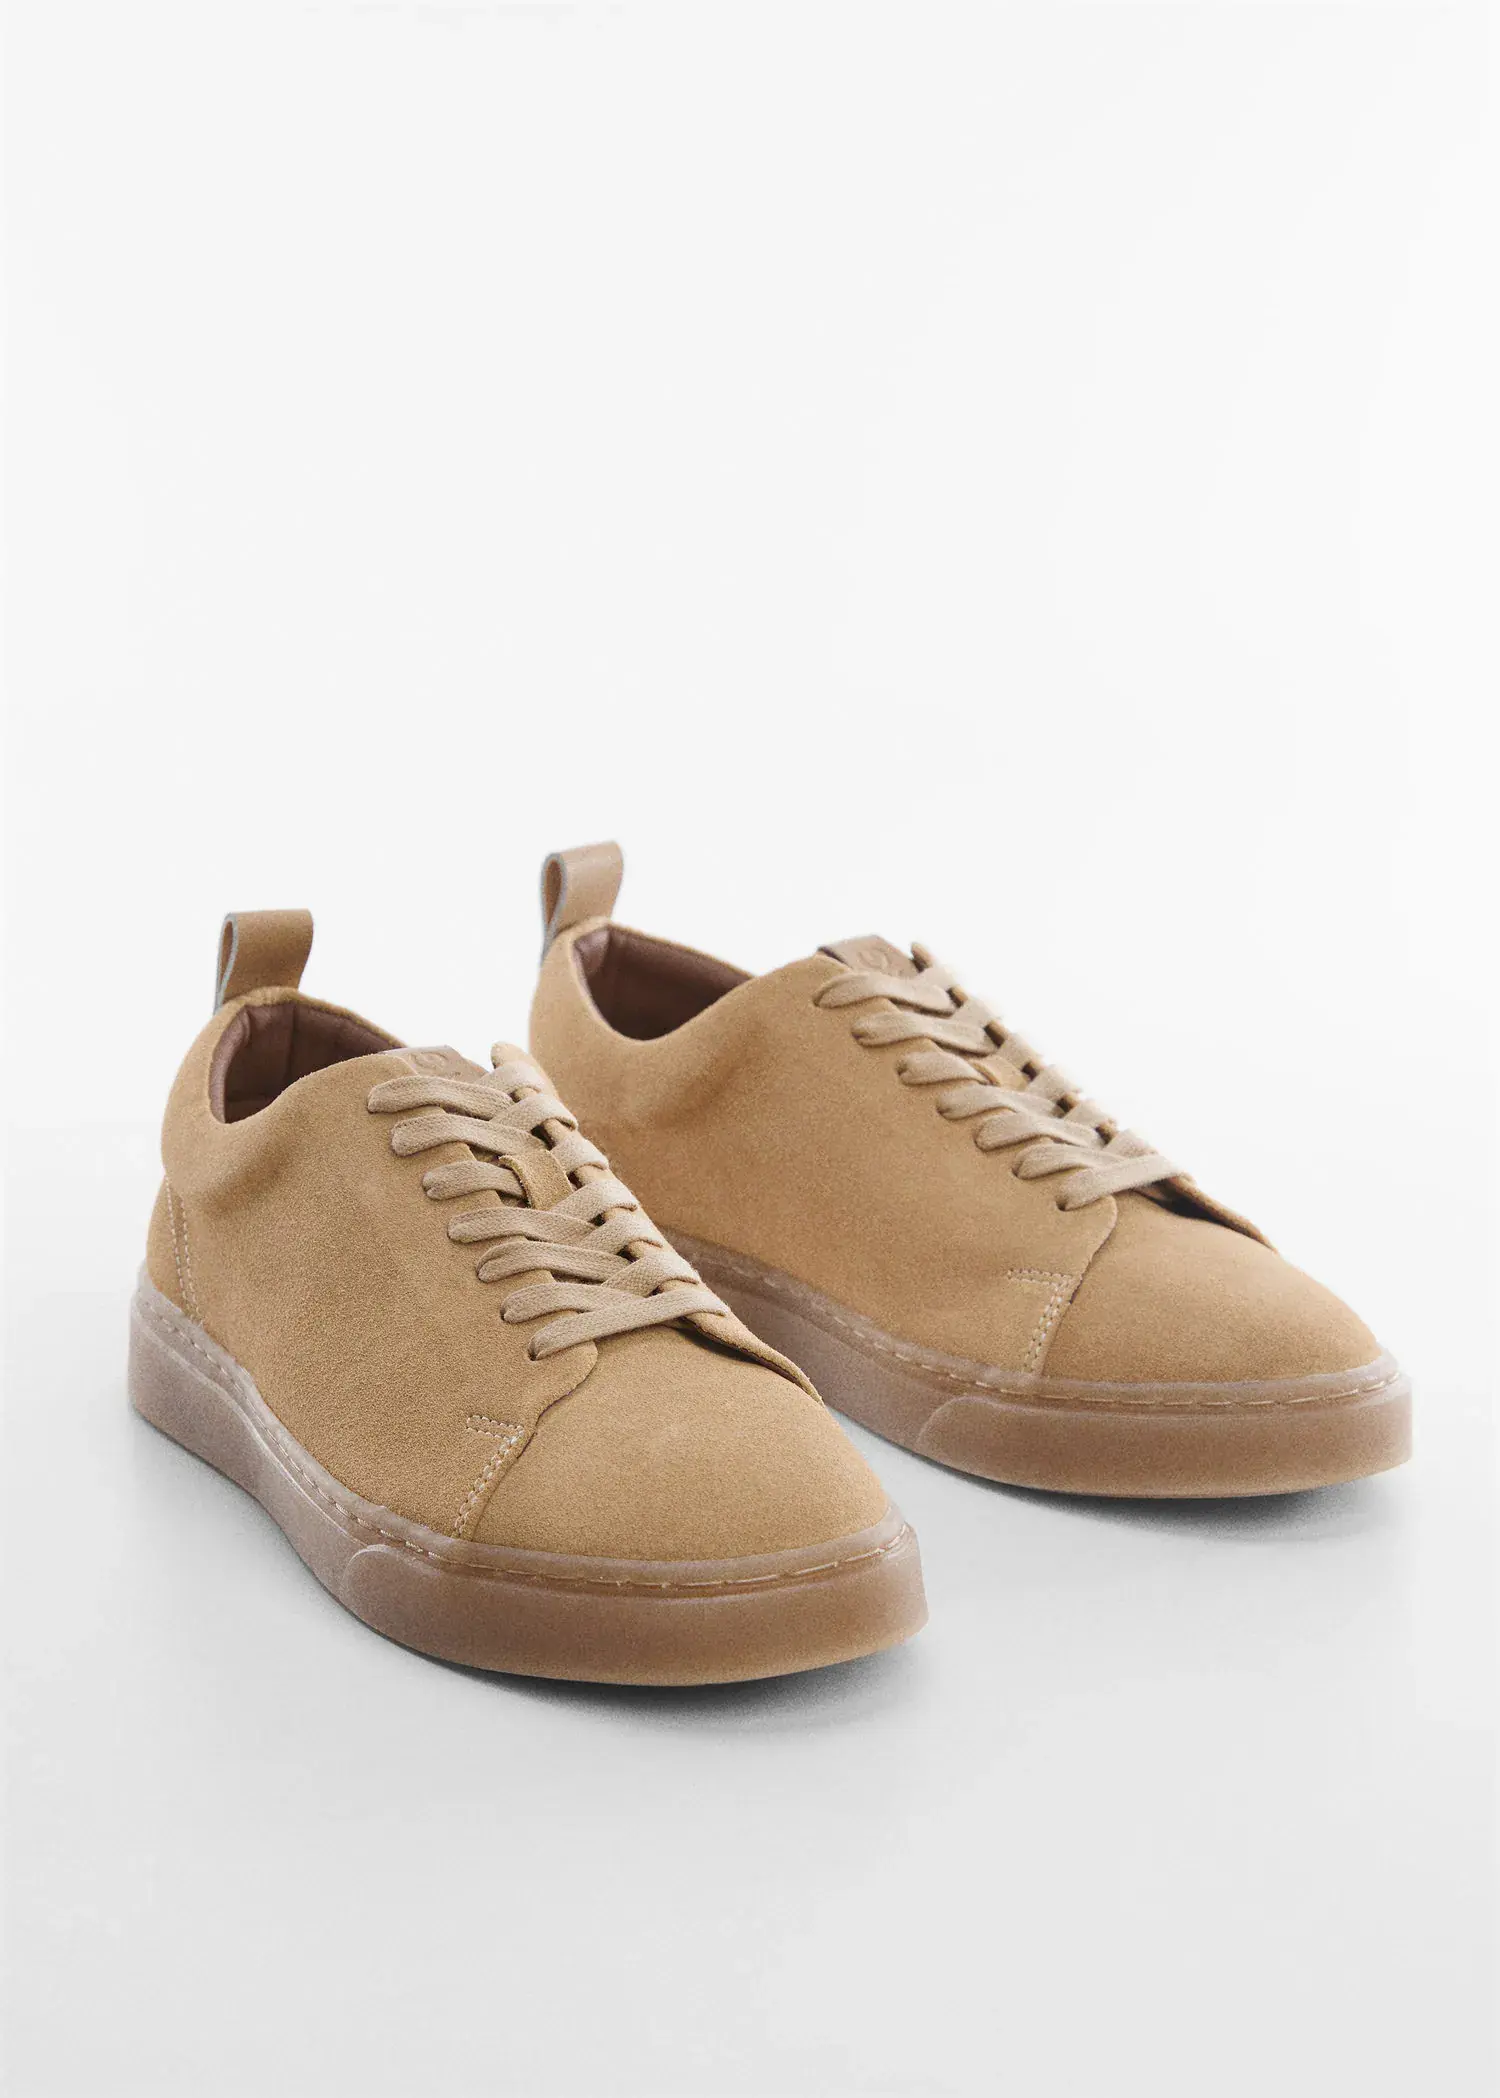 Mango Suede sneakers. a pair of tan sneakers on a white surface. 